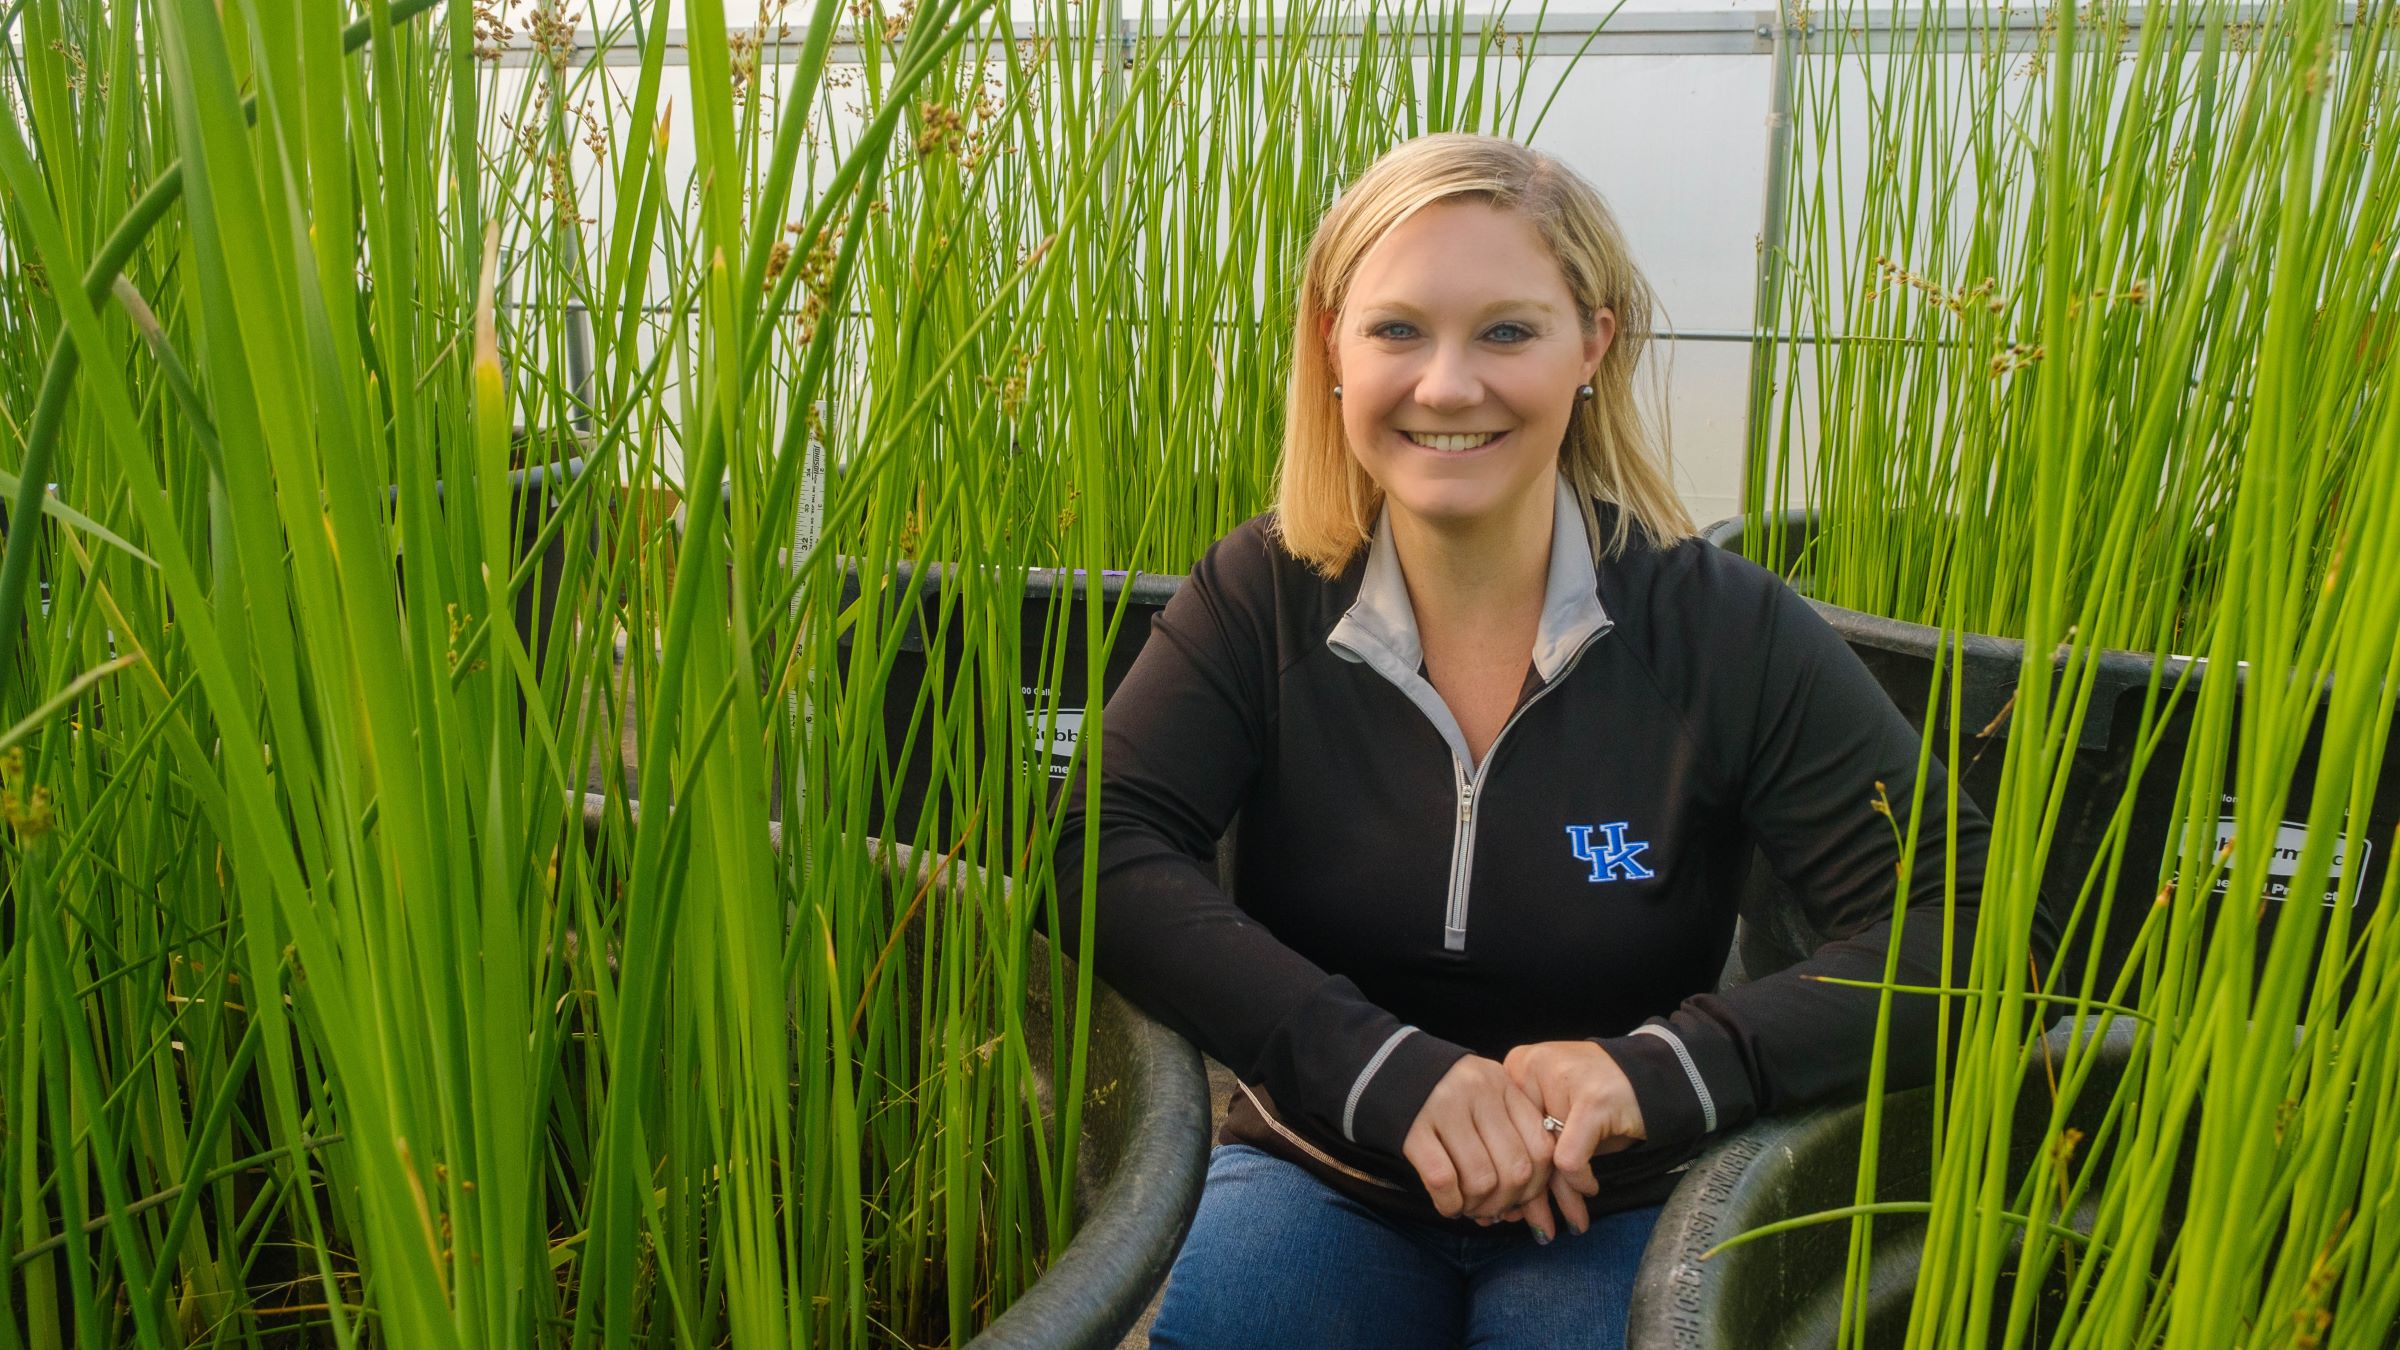 Tiffany Messer is on a mission to protect pollinators and other wildlife from the hazards of neonicotinoids, an insecticide commonly used to shield crops from pests. Photo by Matt Barton.